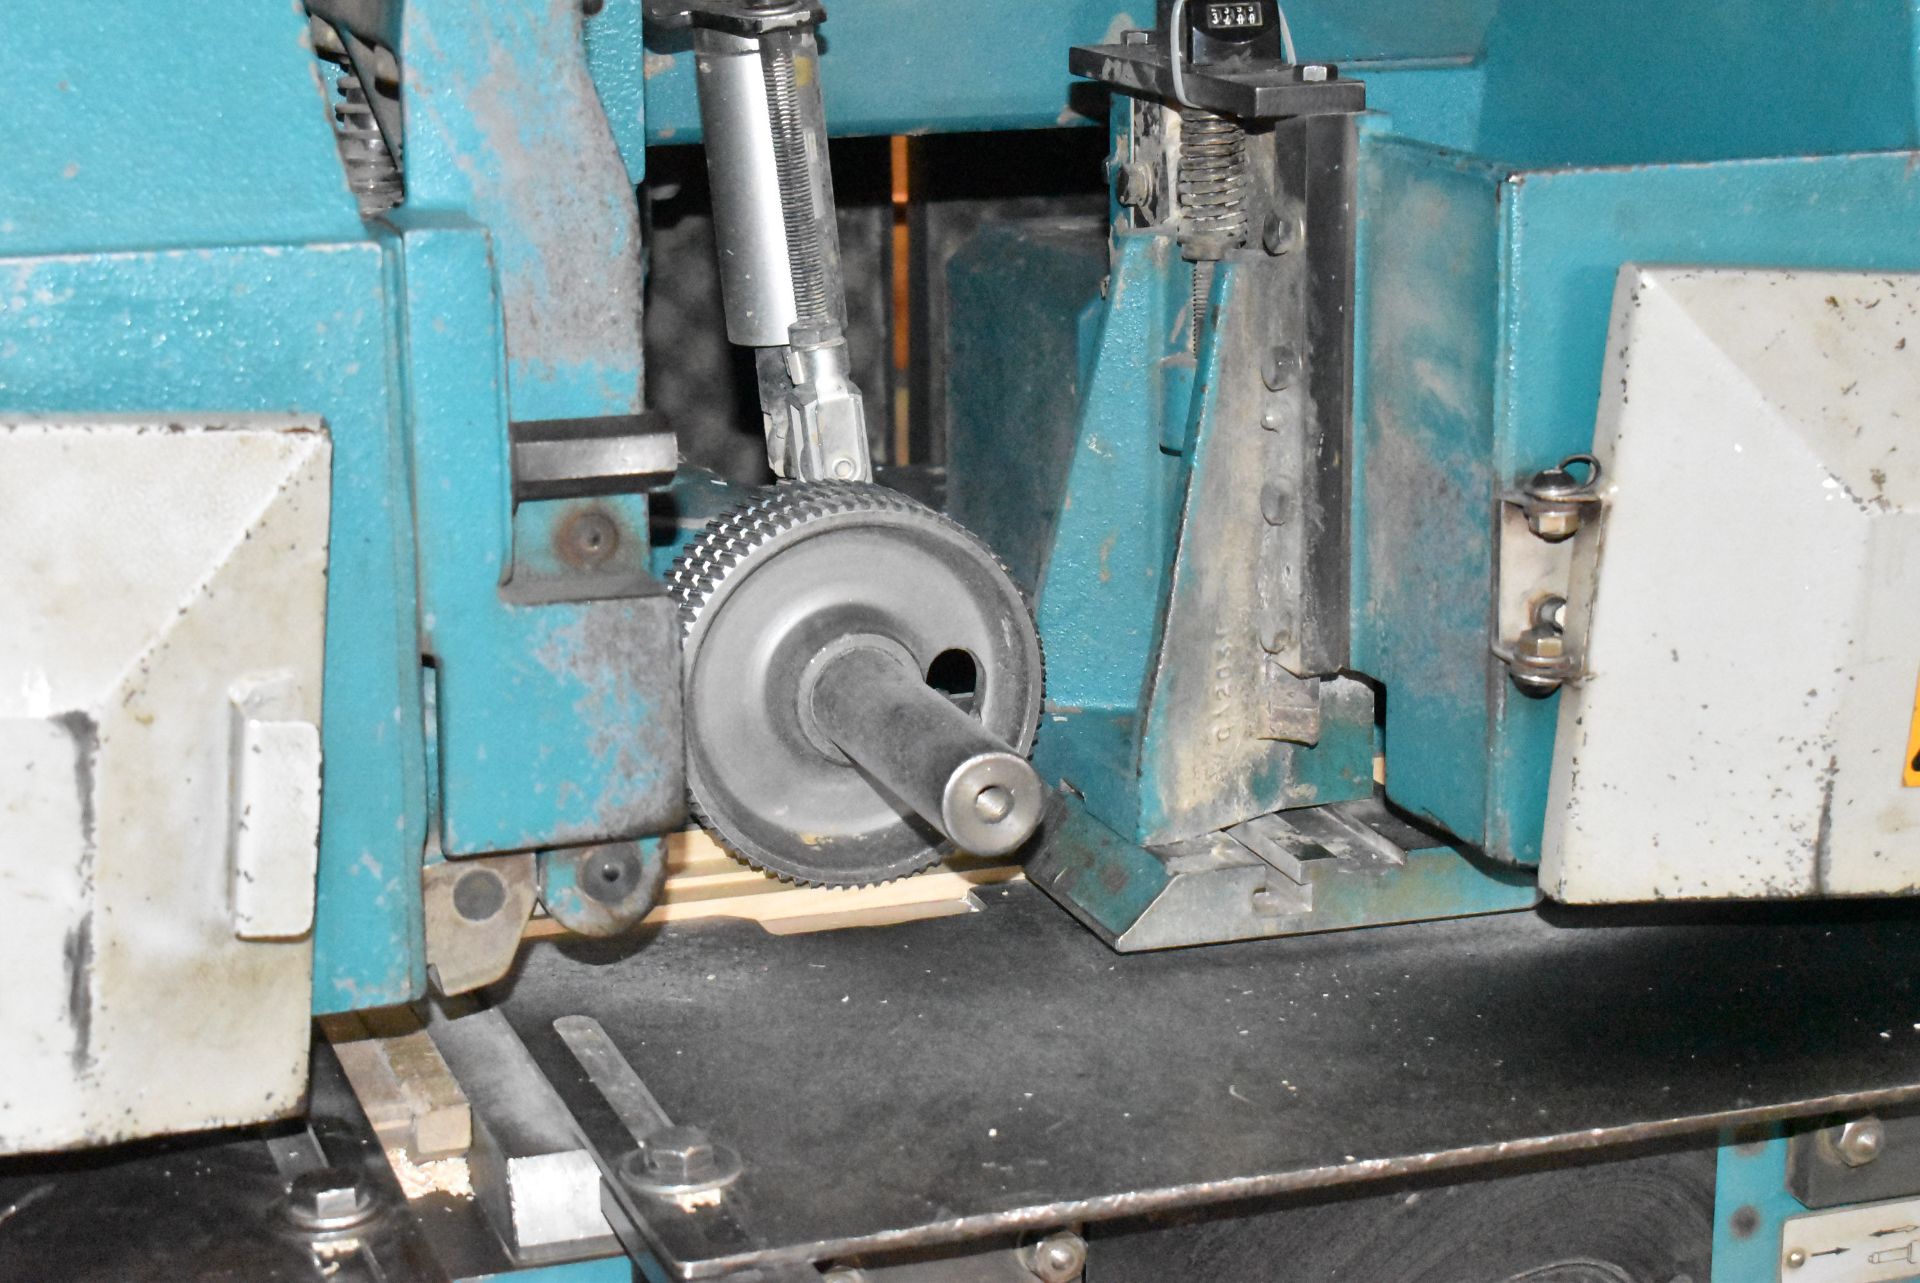 WADKIN GA220/5 MOULDER WITH 9.06" X 5.12" MAX. WORKPIECE DIMENSIONS, 6,000 RPM CUTTERBLOCK SPINDLES, - Image 6 of 10